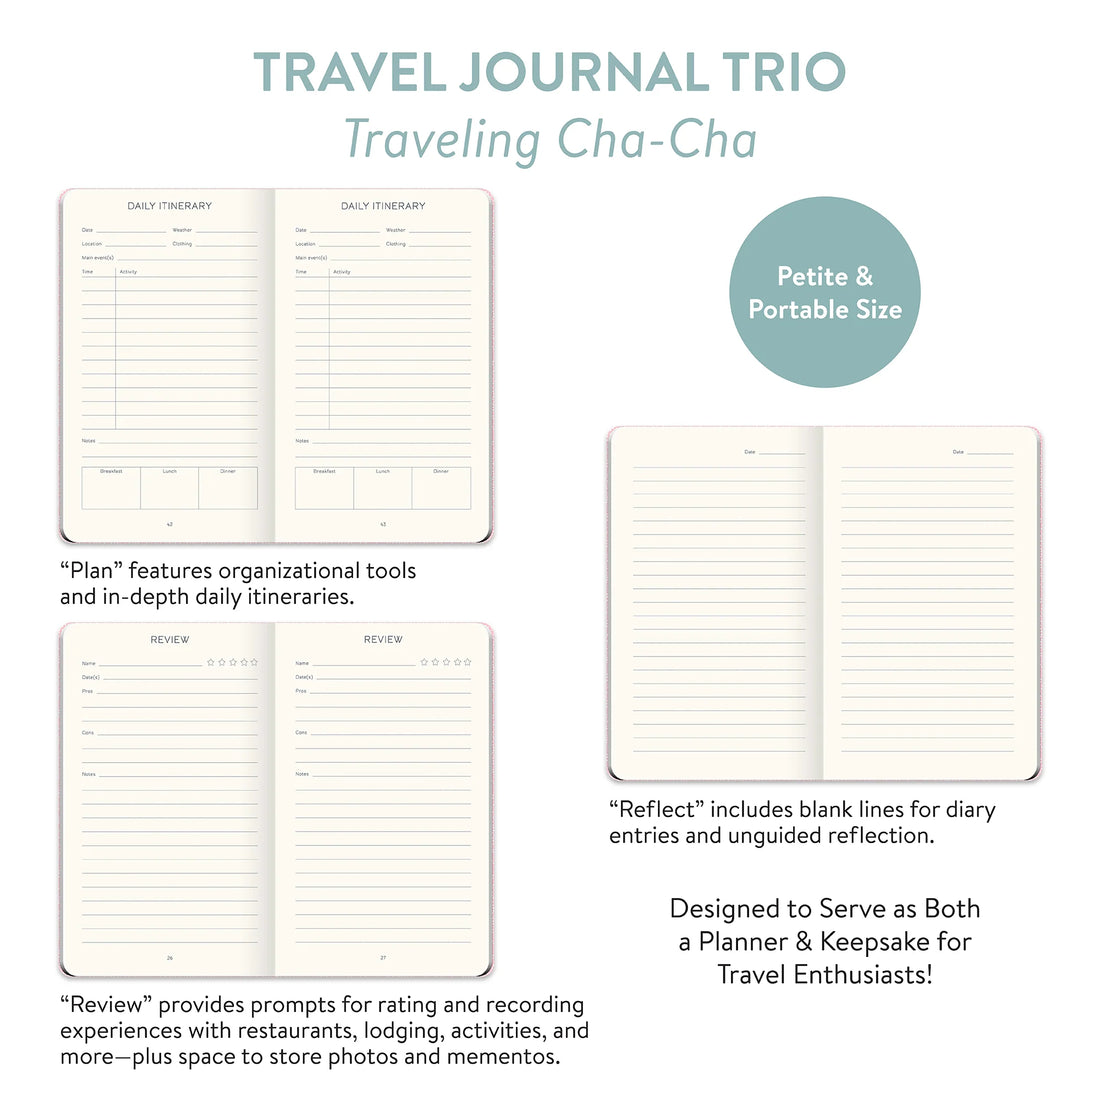 Traveling Cha-Cha Travel Journal Trio Preview #5